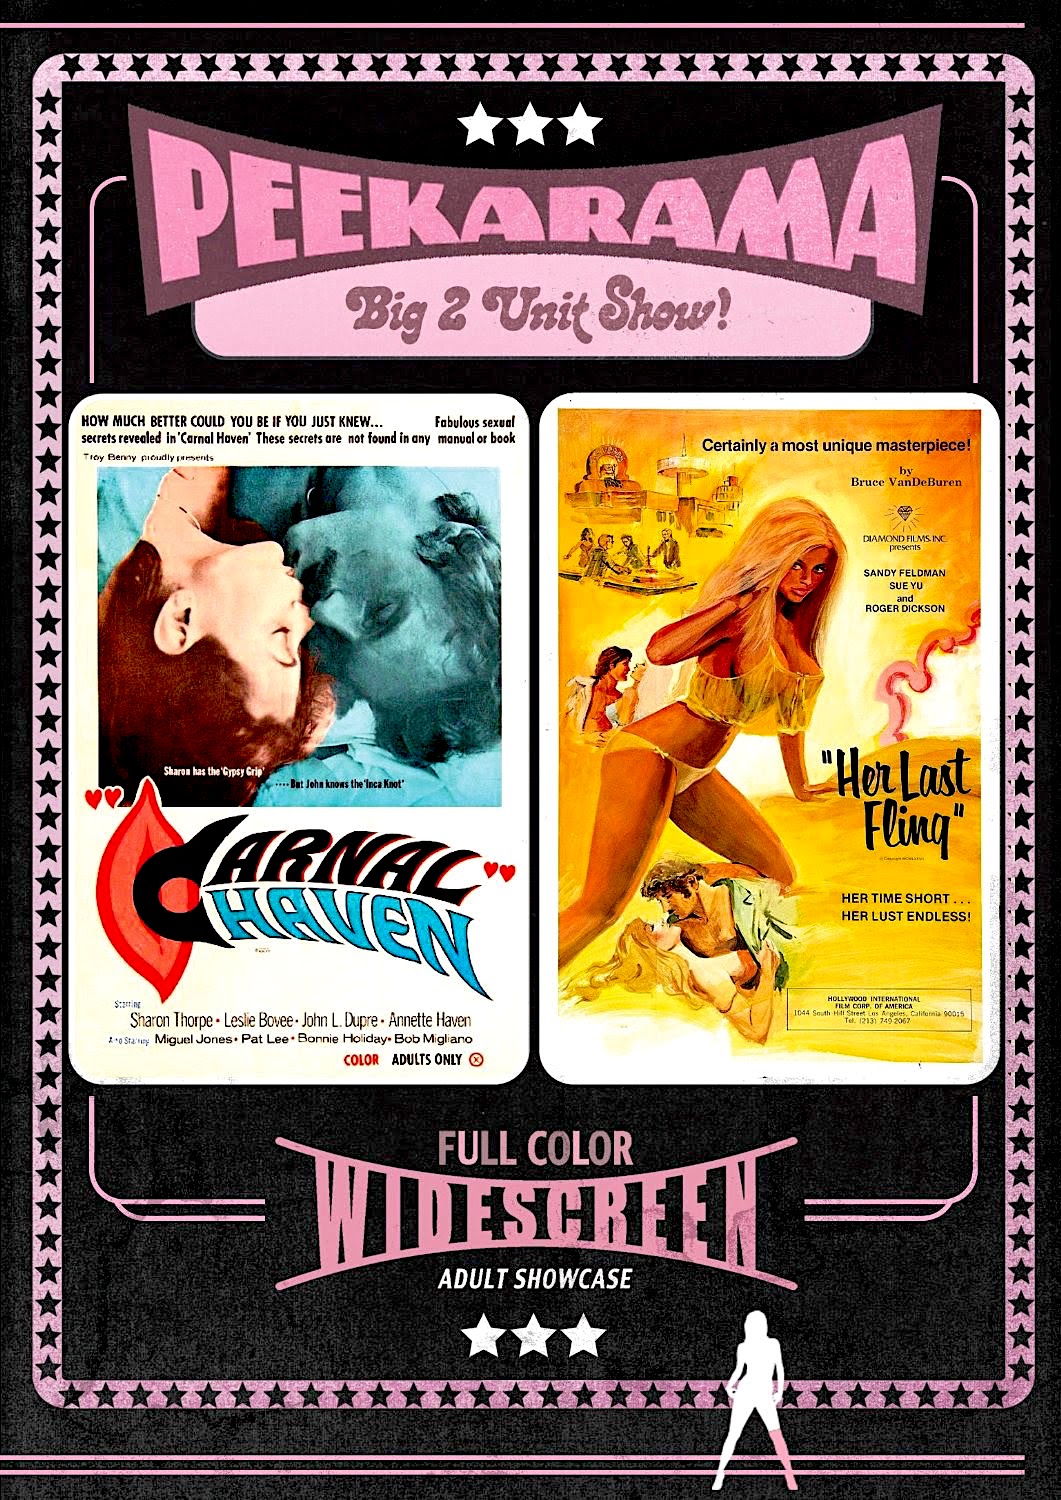 Blu Ray And Dvd Covers Vinegar Syndrome Peekarama Dvds Abduction Of An American Playgirl